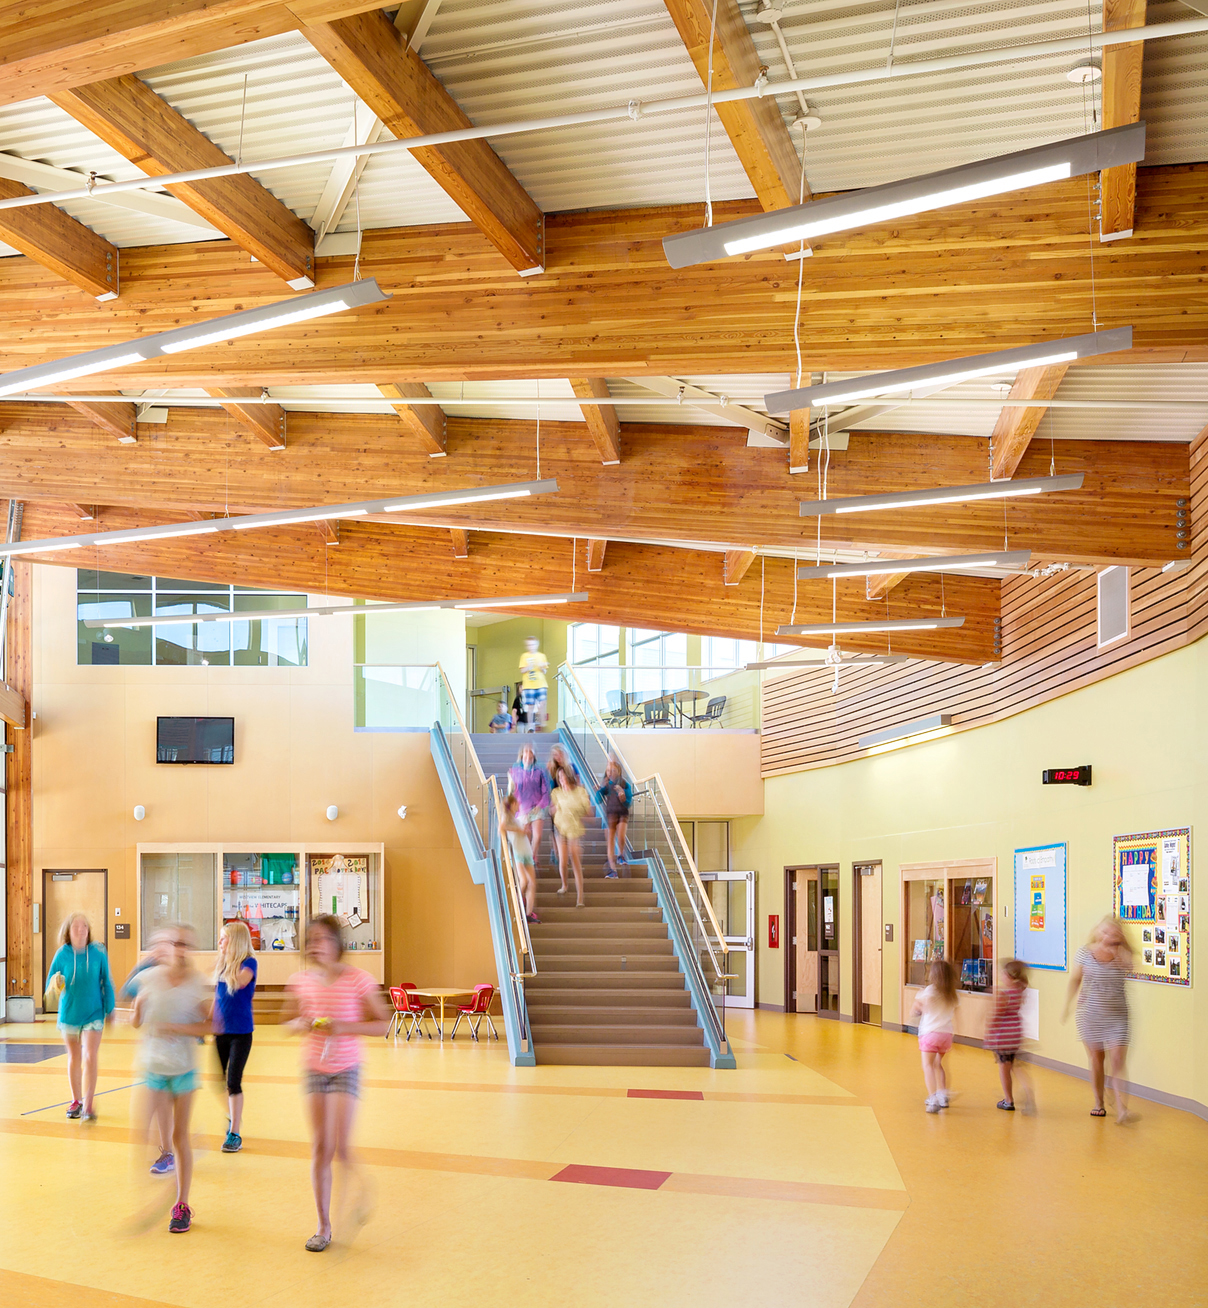 Interior daytime image of low rise Westview Elementary School entrance and two story multi-purpose area complete with students, glue-laminated timber (glulam) beams overhead, and wood accents throughout